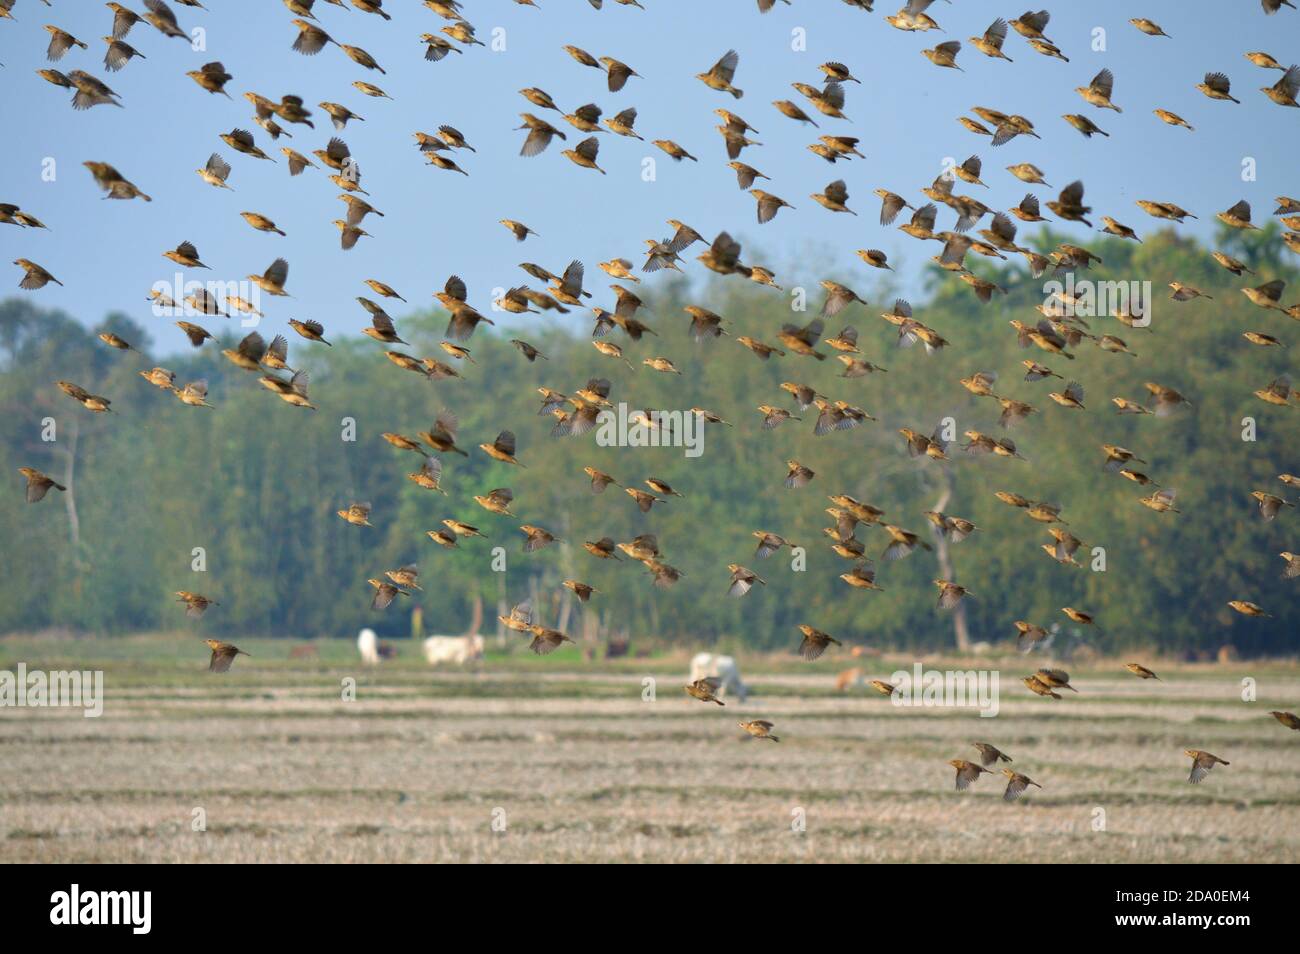 Baya Weaver Birds Are Flying Over The Paddy Field Stock Photo